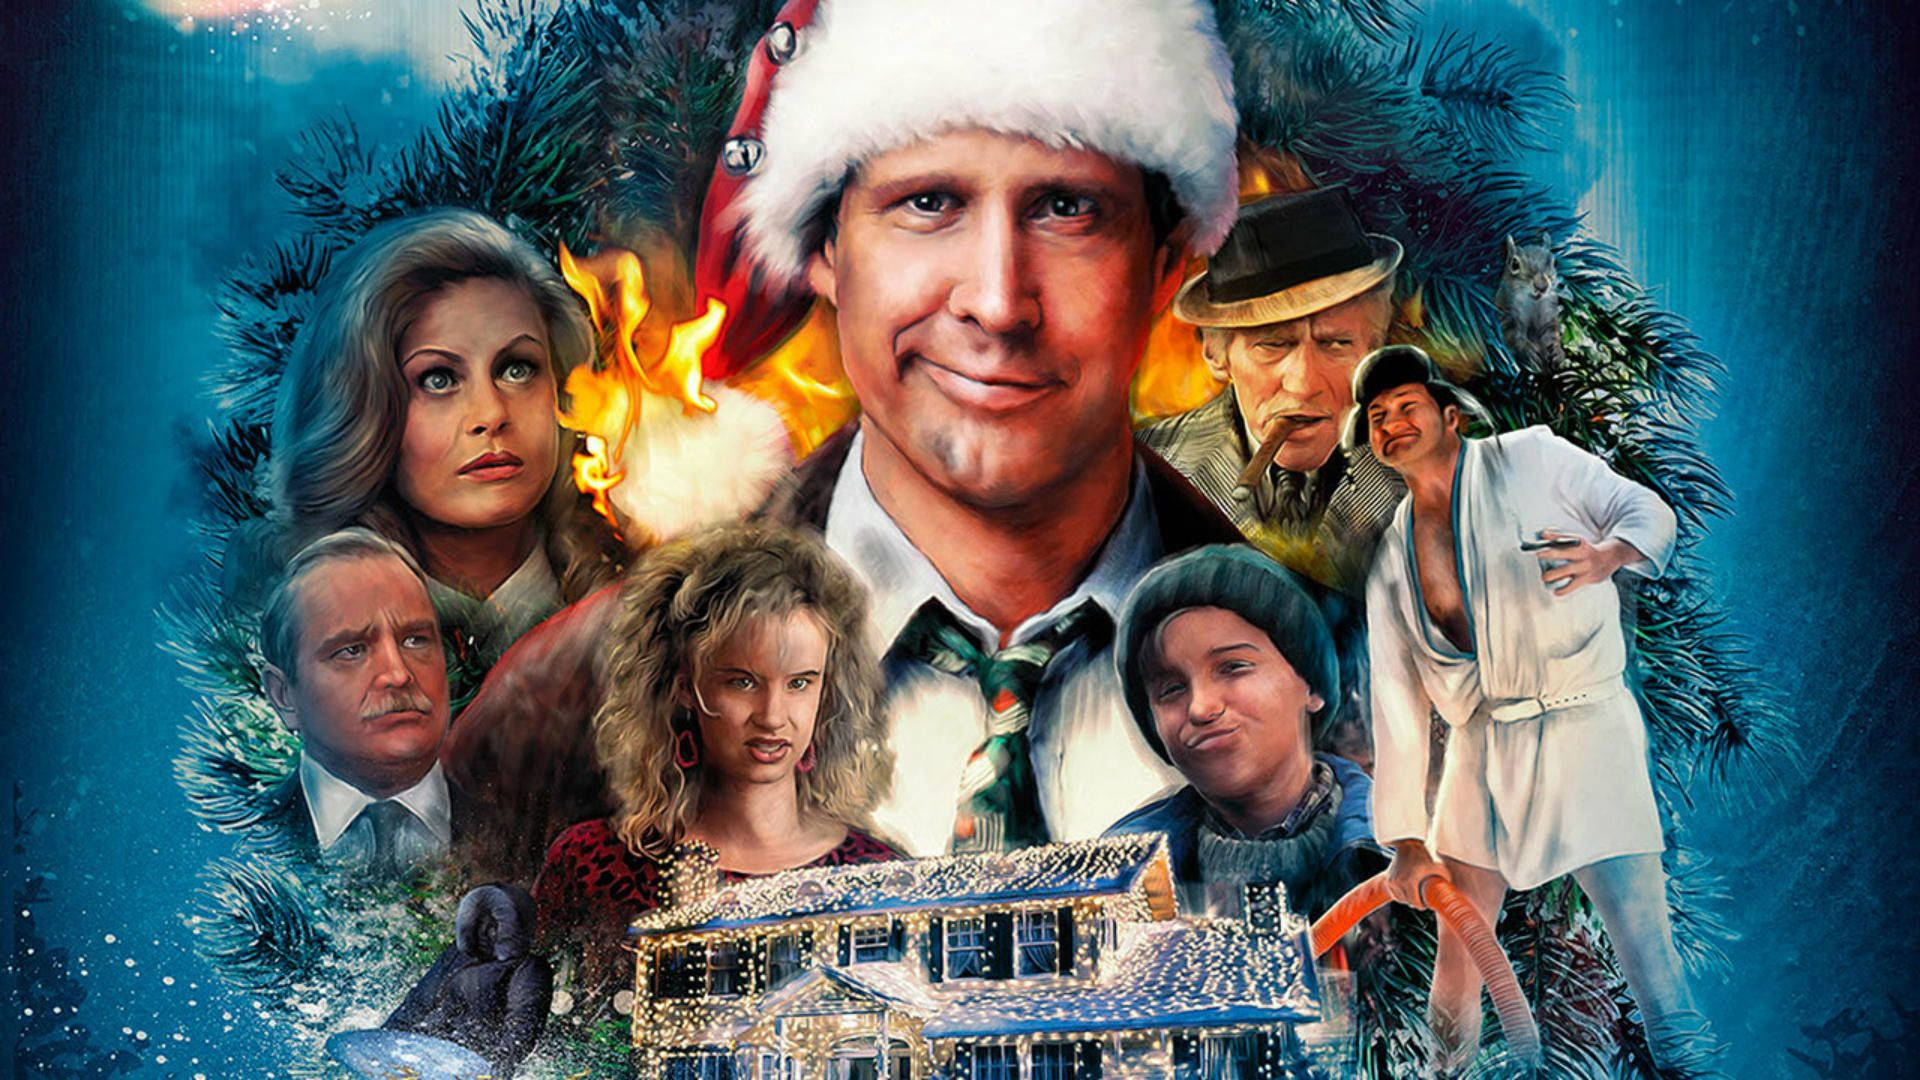 Christmas Movie National Lampoon's Christmas Vacation Cast Wallpaper